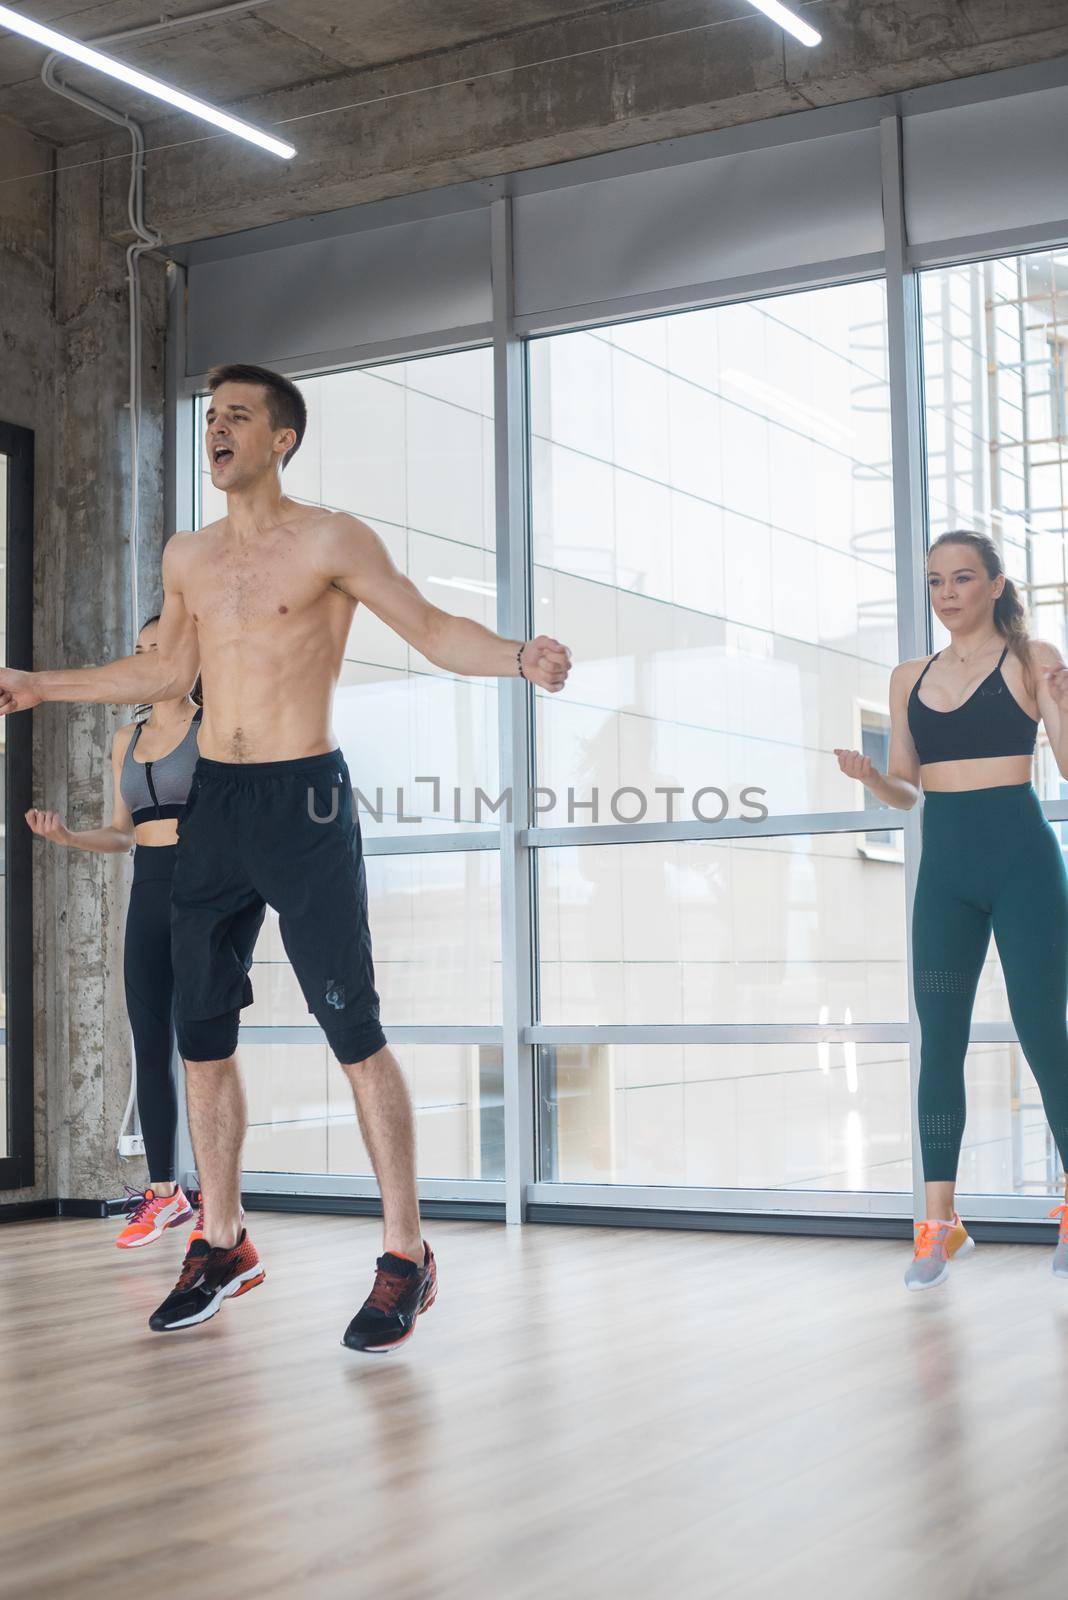 Fitness training in the bright studio - two young women training with their coach - jumping exercises. Mid shot